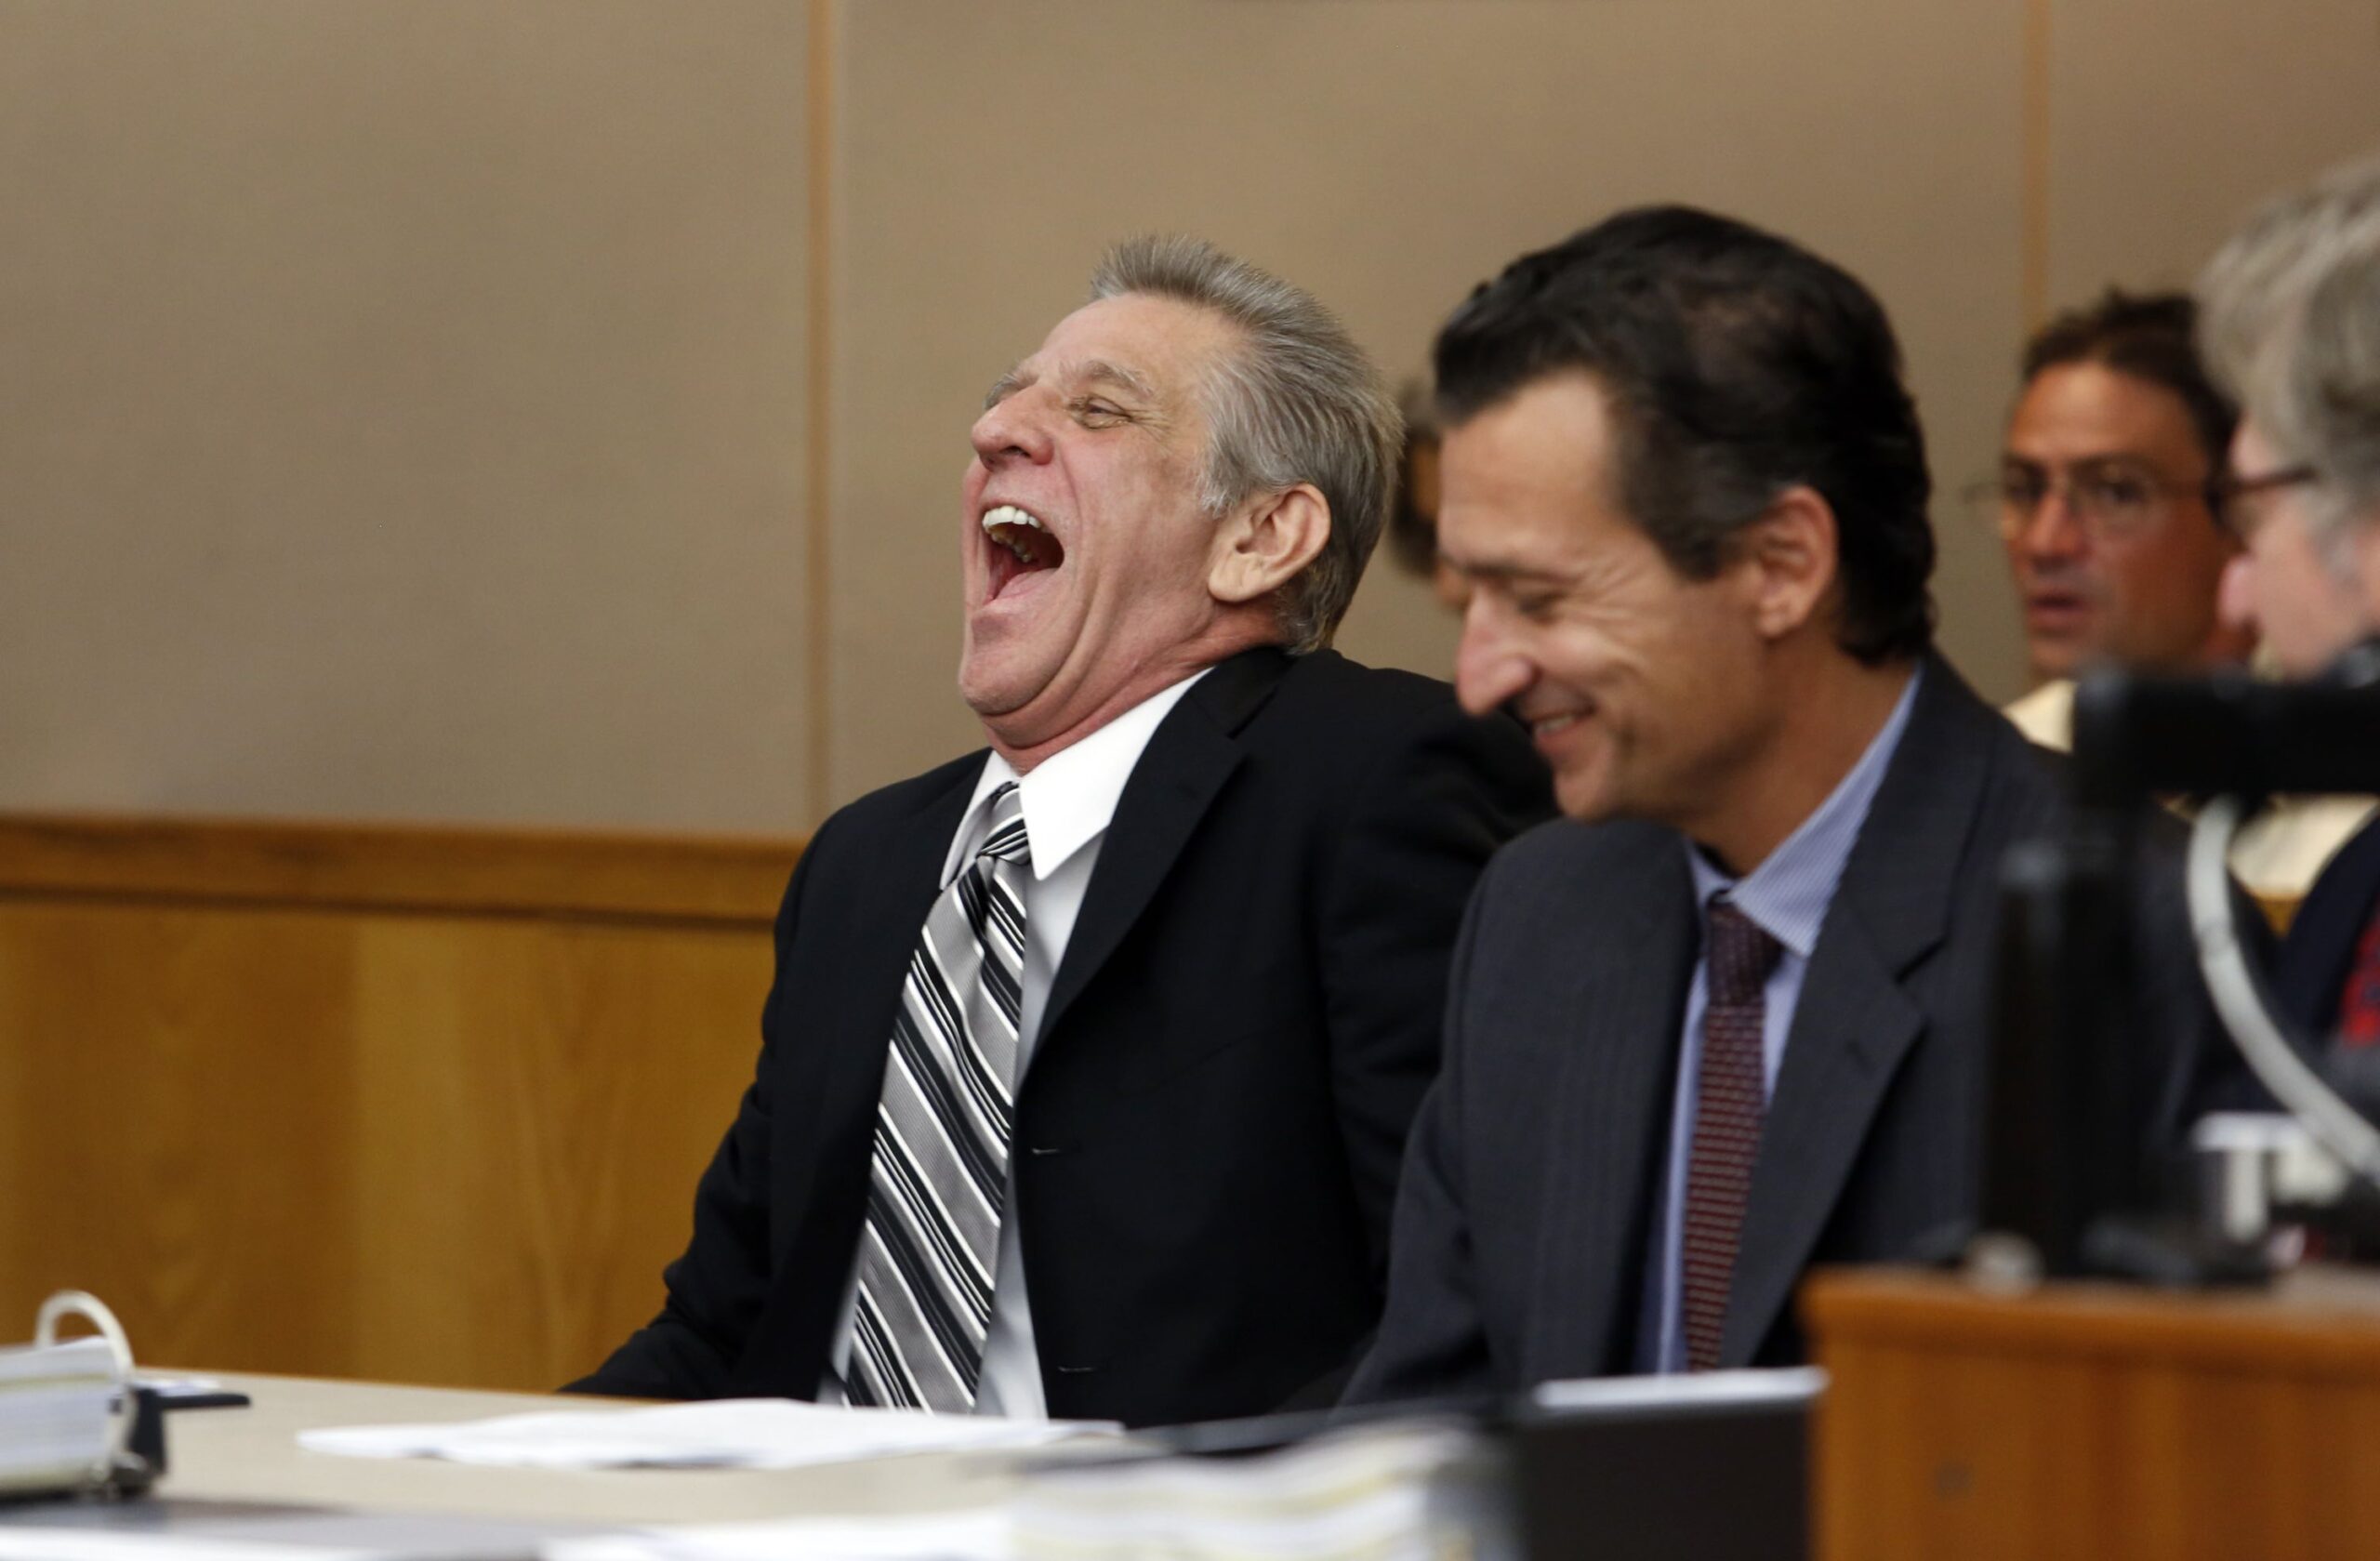 Steven Mark Chaney reacts to his release during a hearing in a Dallas courtroom where a court reversed his 1987 murder conviction because of discredited bite mark testimony on Oct. 12, 2015. Innocence Project Attorneys M. Chris Fabricant and Barry C Scheck are on the right. (Image: Lara Solt)